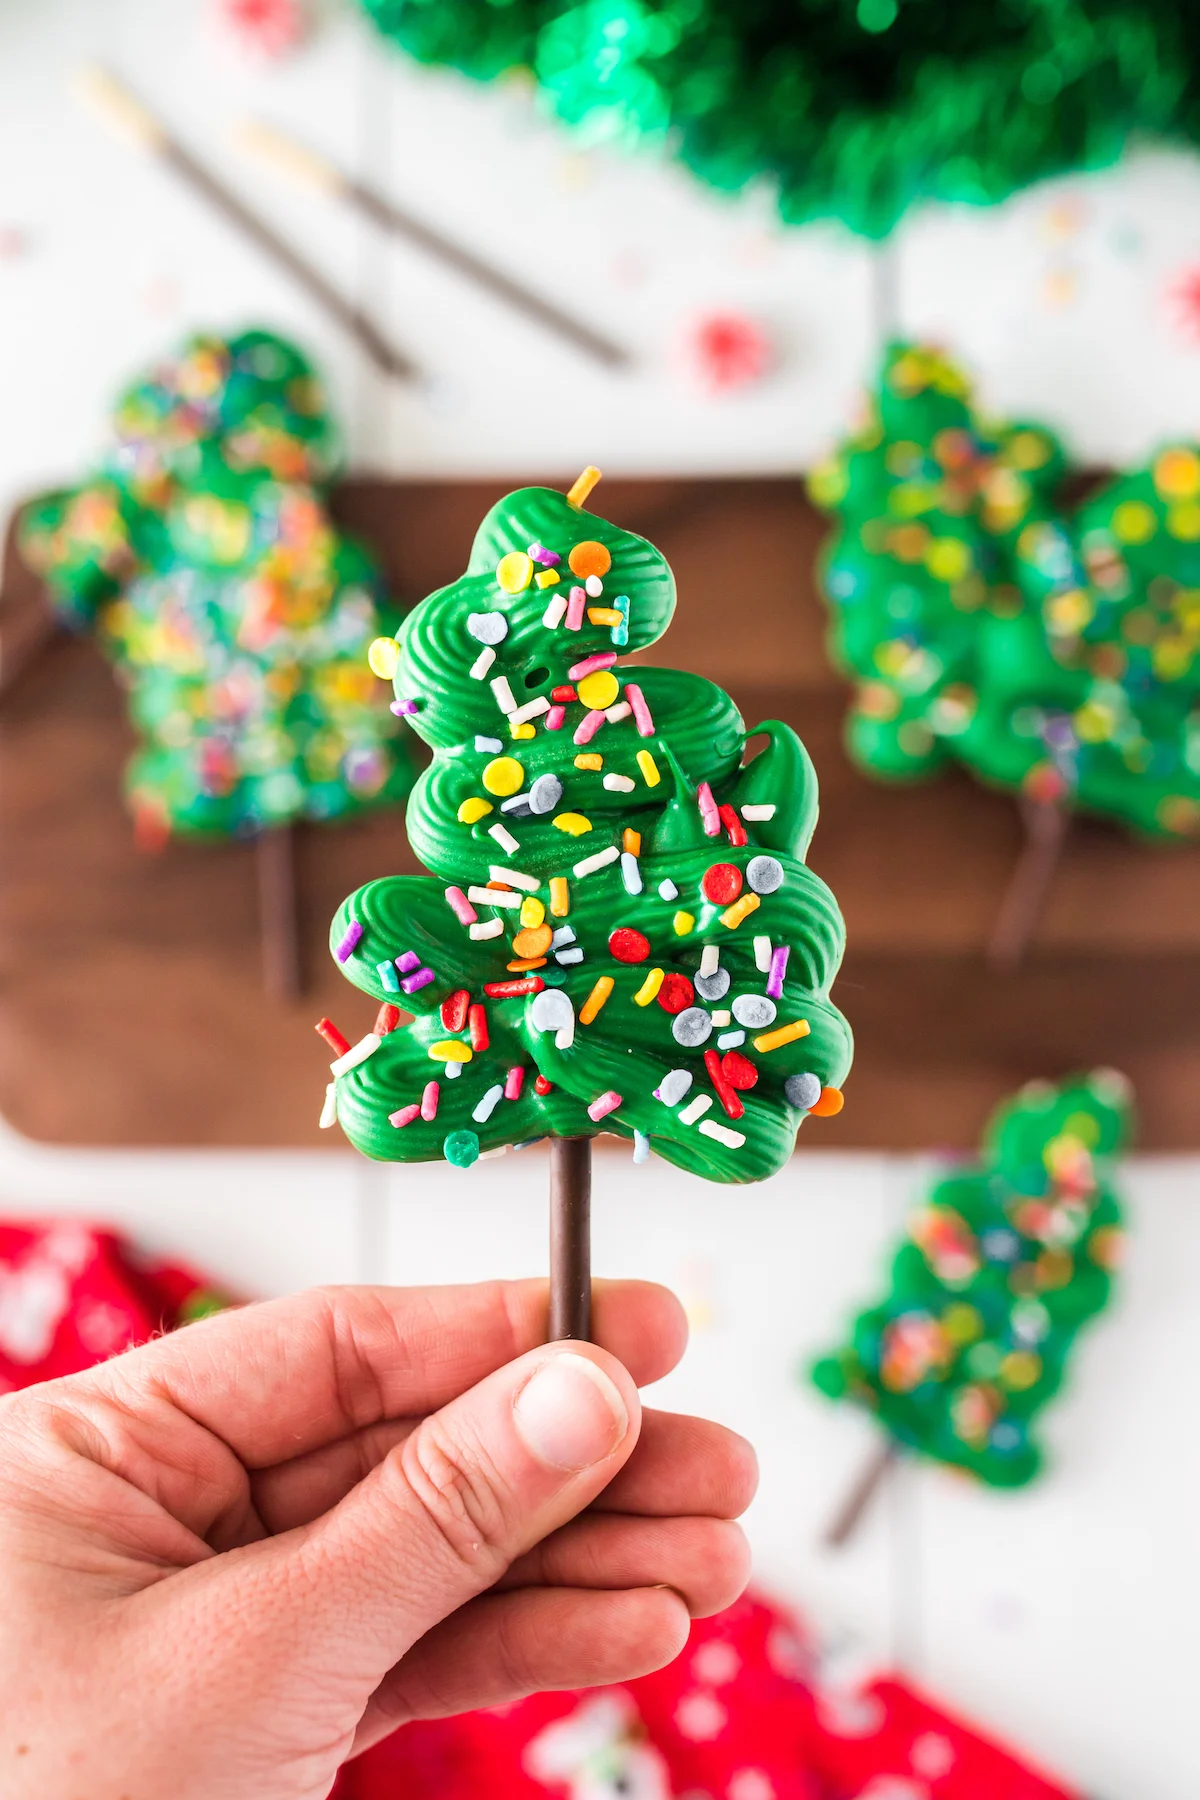 woman holding pocky christmas tree treat made with chocolate and sprinkles